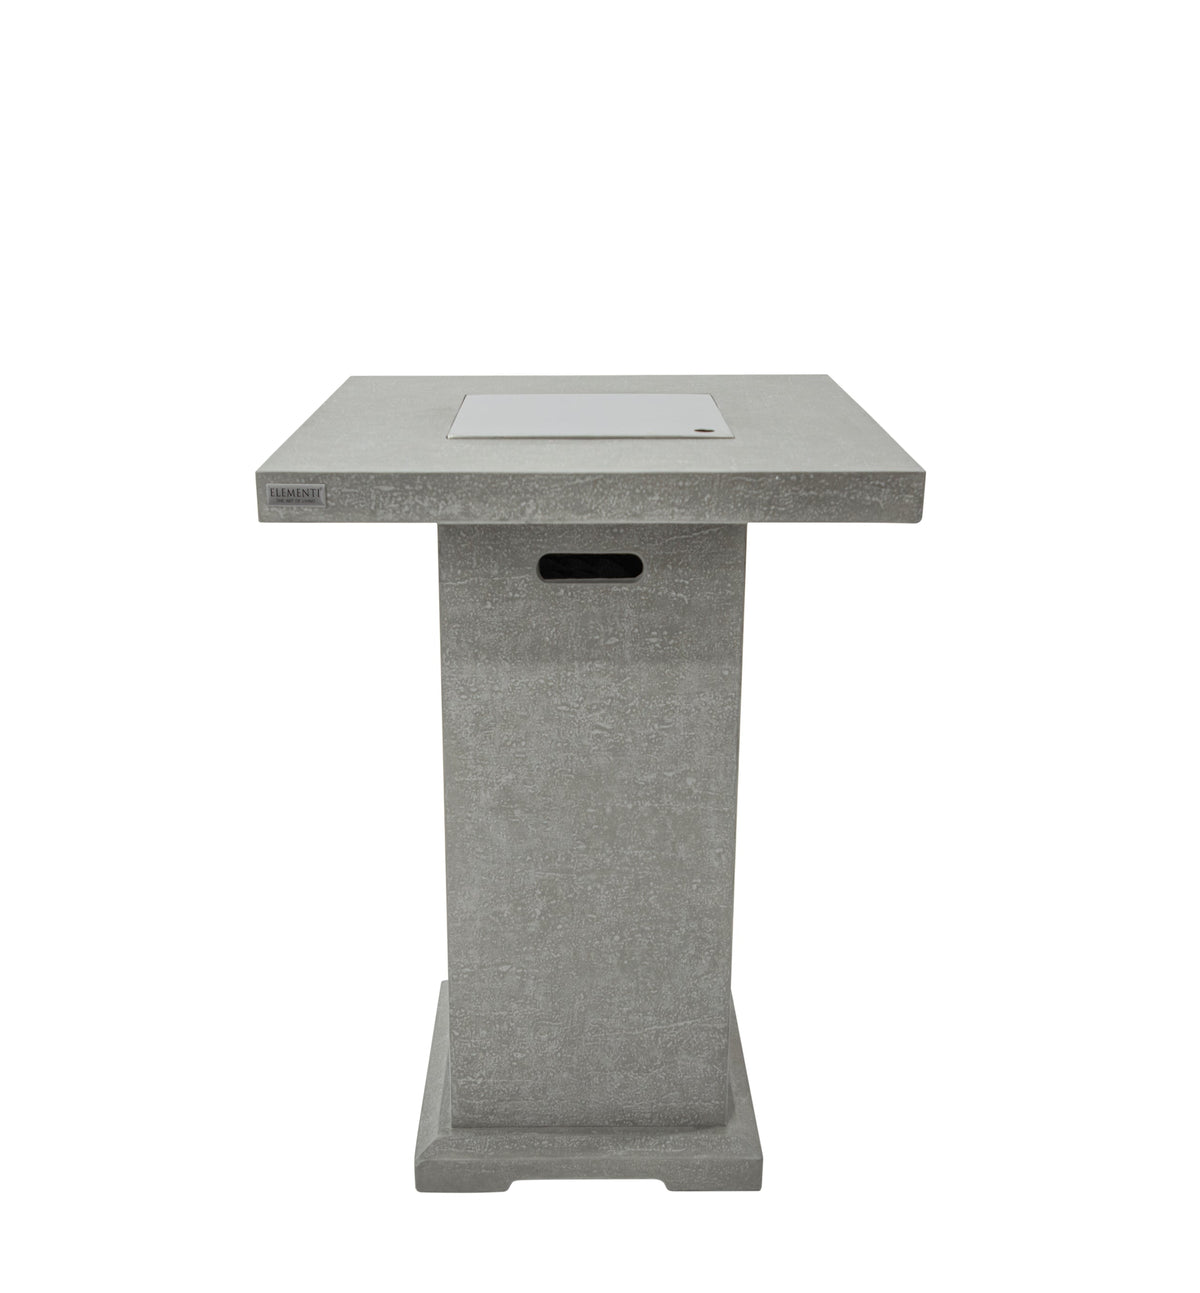 Elementi Montreal Bar Table in Light Gray with steel lid